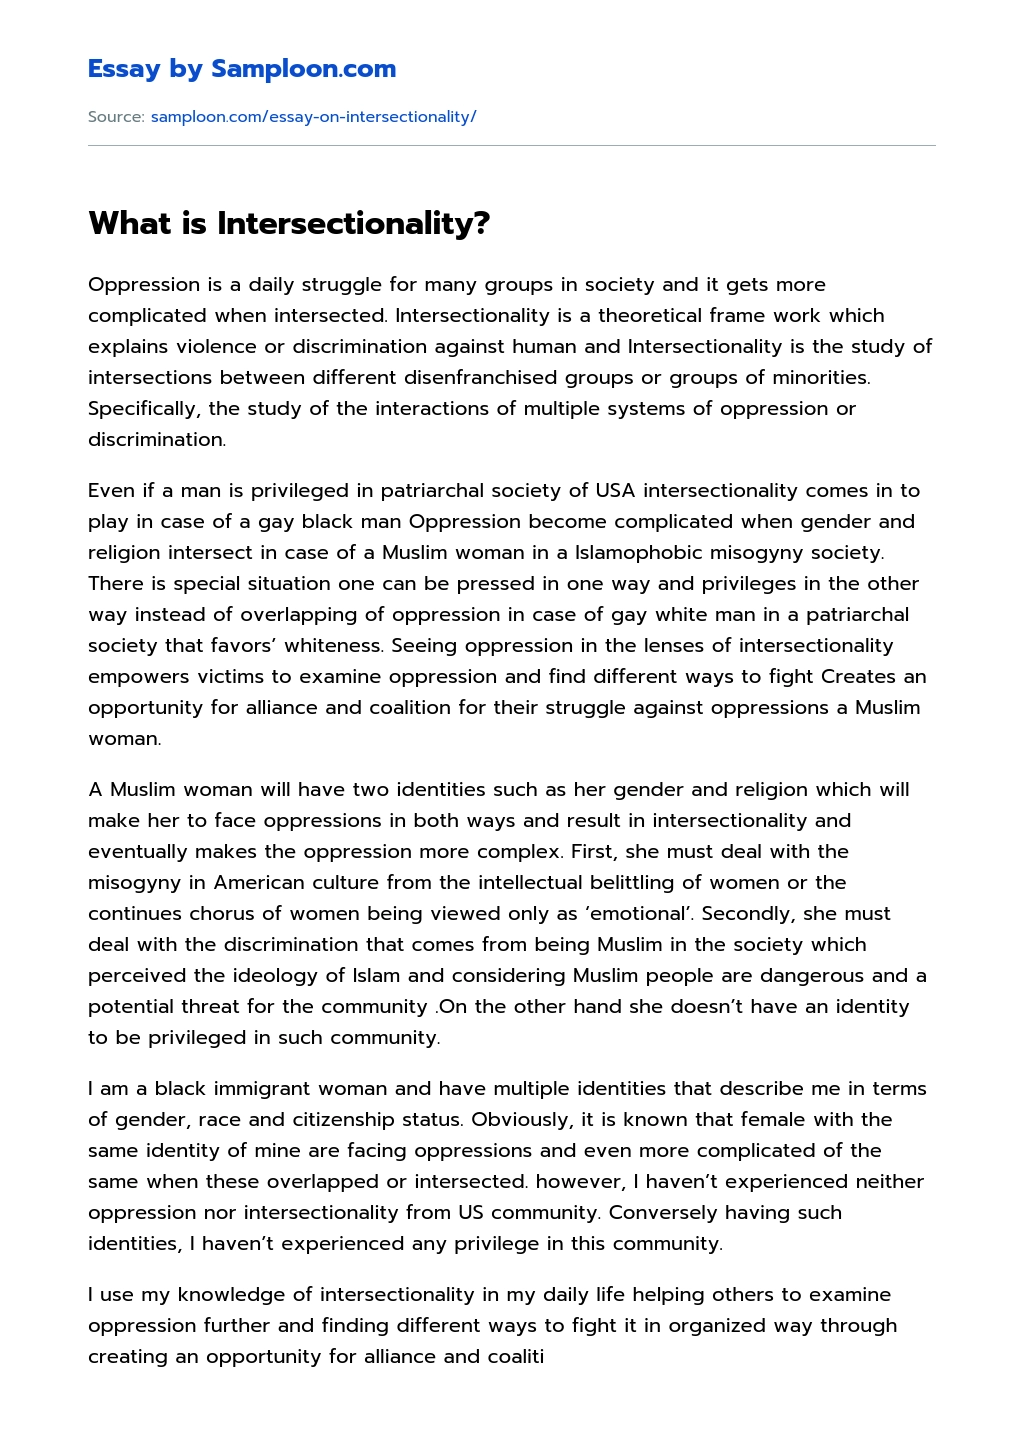 What is Intersectionality? essay